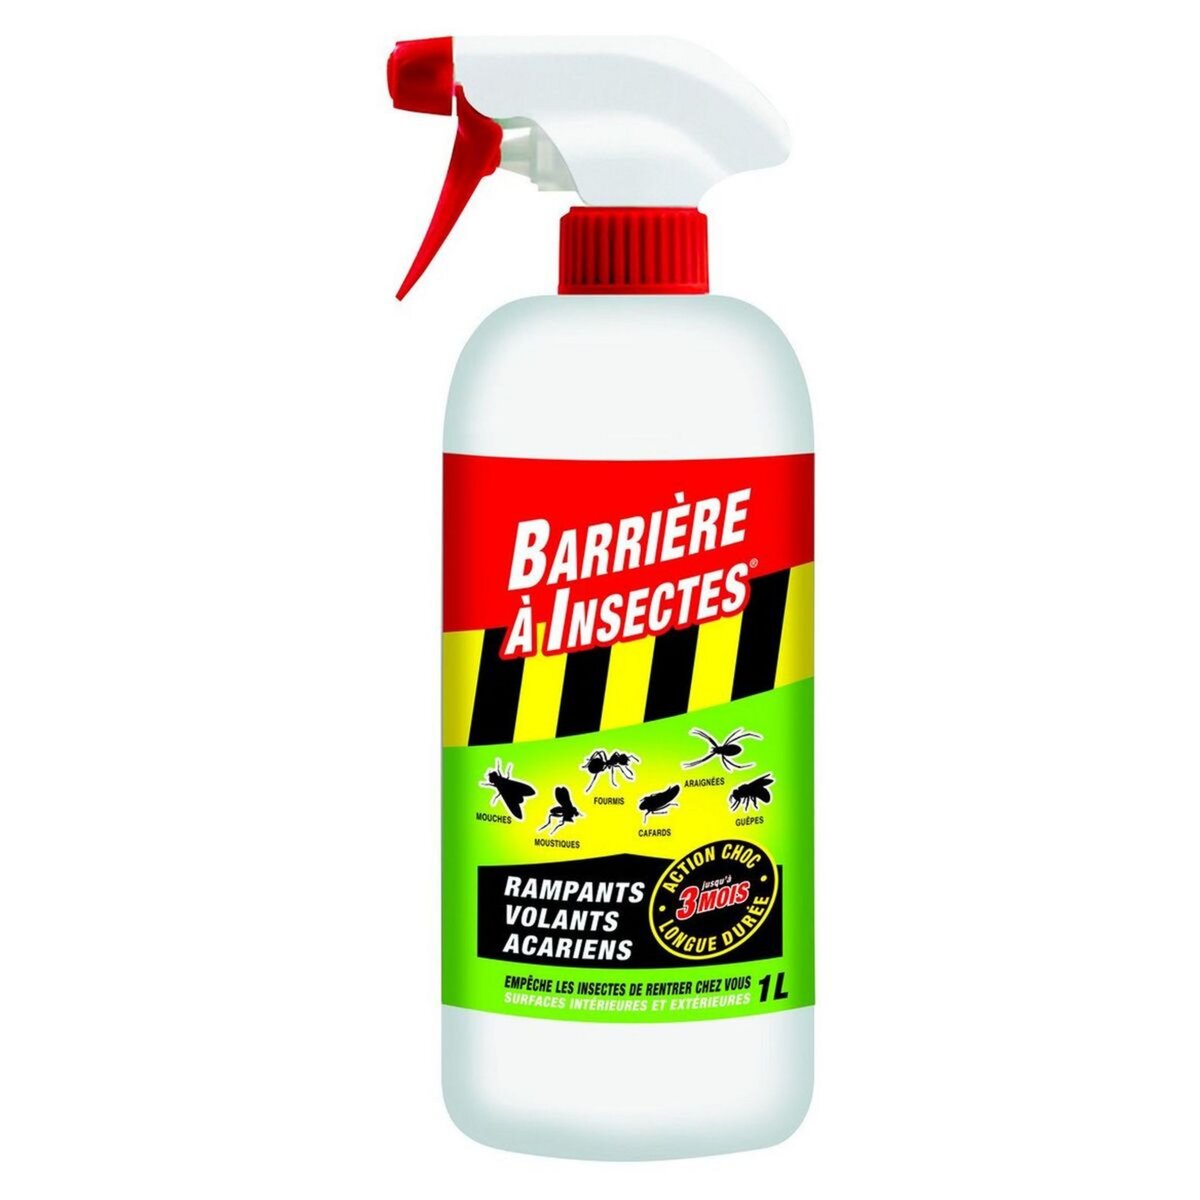 BARRIERE A INSECTES Spray anti-insectes rampants volants et acariens 1l